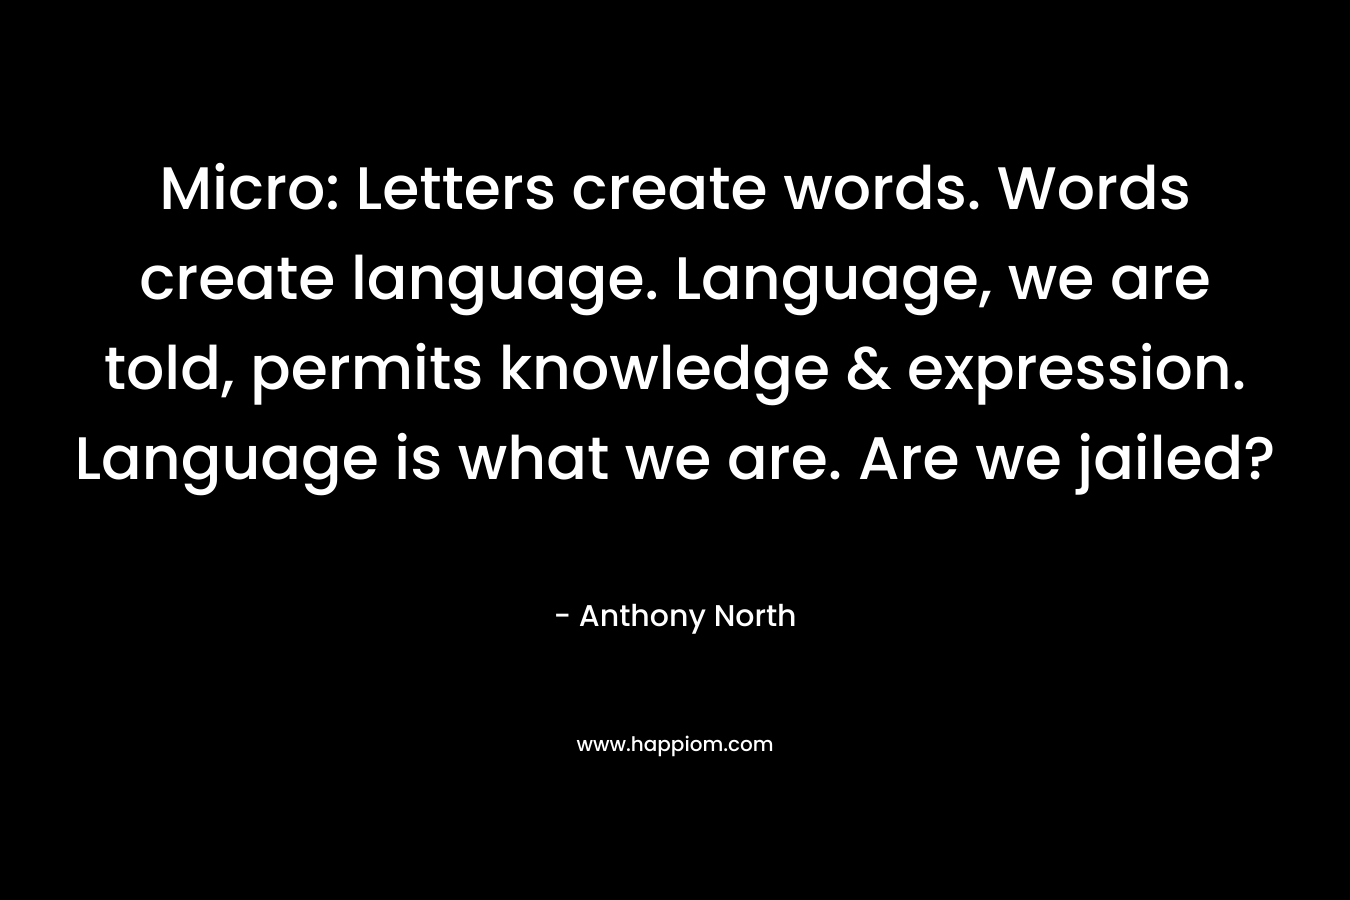 Micro: Letters create words. Words create language. Language, we are told, permits knowledge & expression. Language is what we are. Are we jailed?